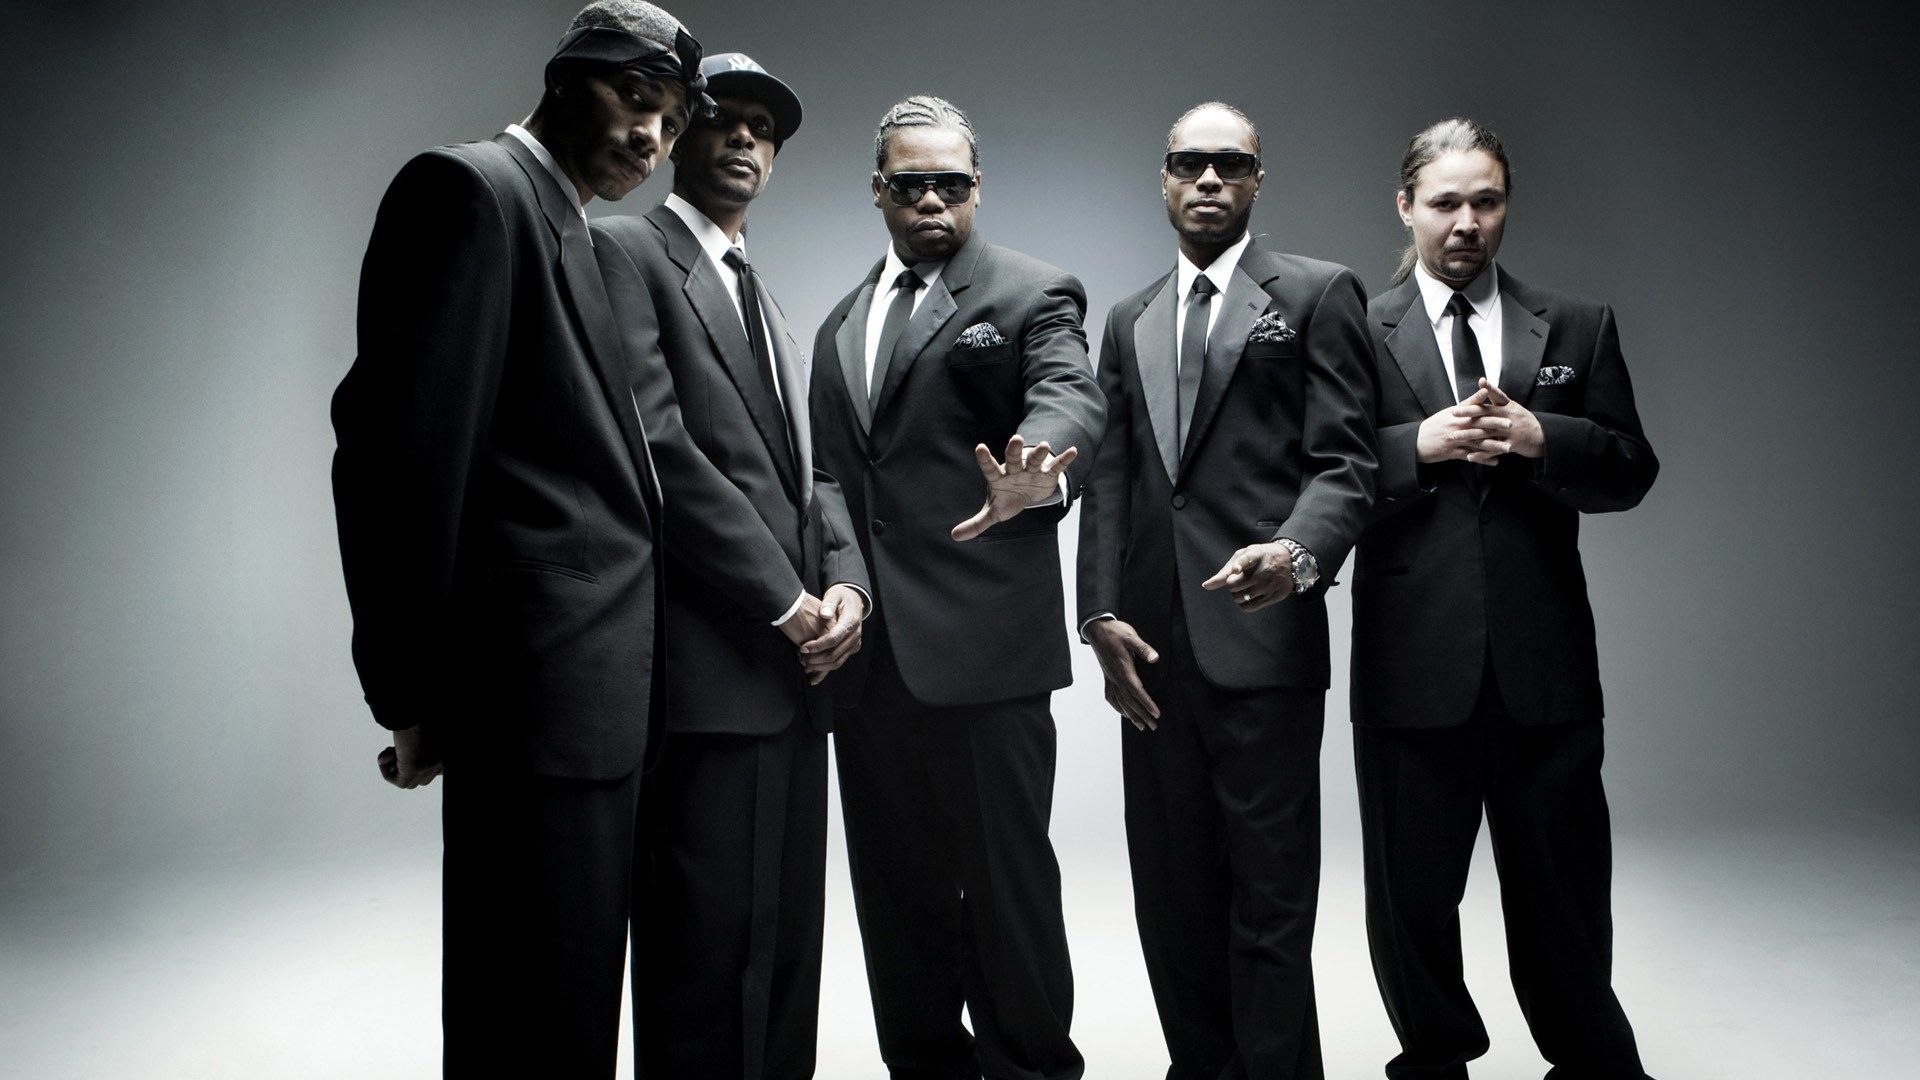 3 Bone Thugs n harmony HD Wallpapers Backgrounds - Wallpaper Abyss